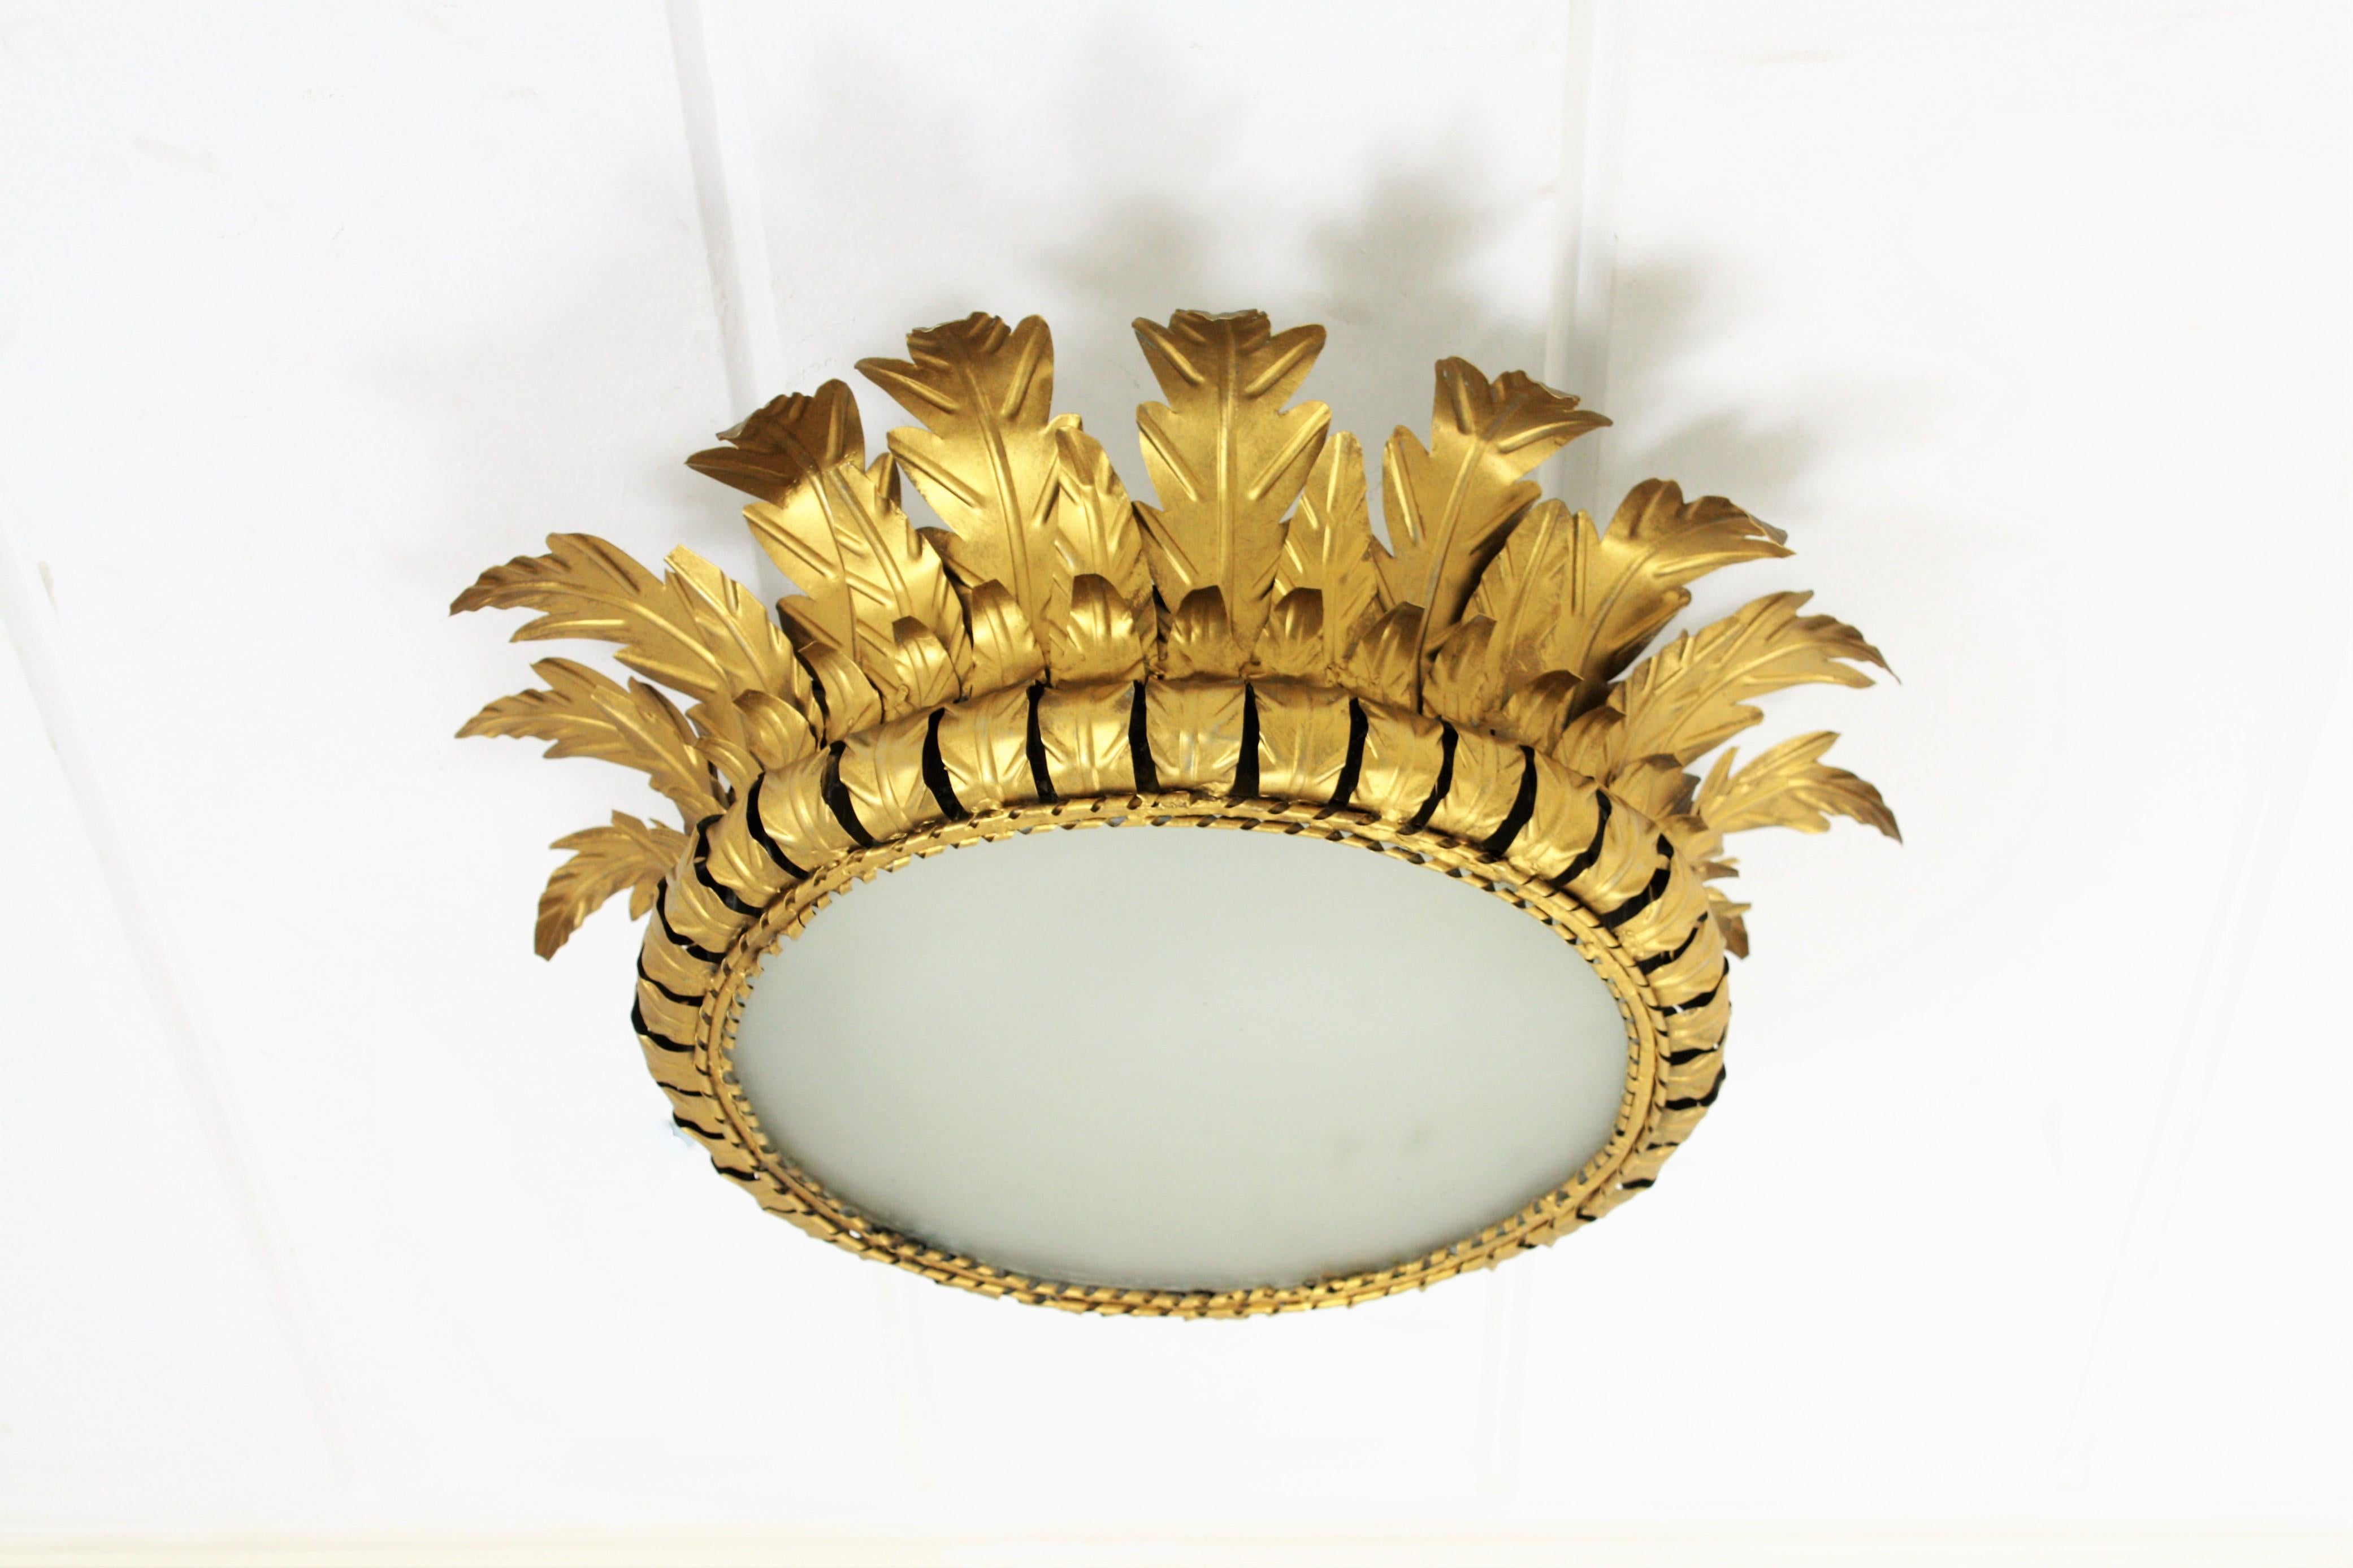 Sunburst Crown Large Ceiling Light Fixture in Gilt Metal and Frosted Glass 3